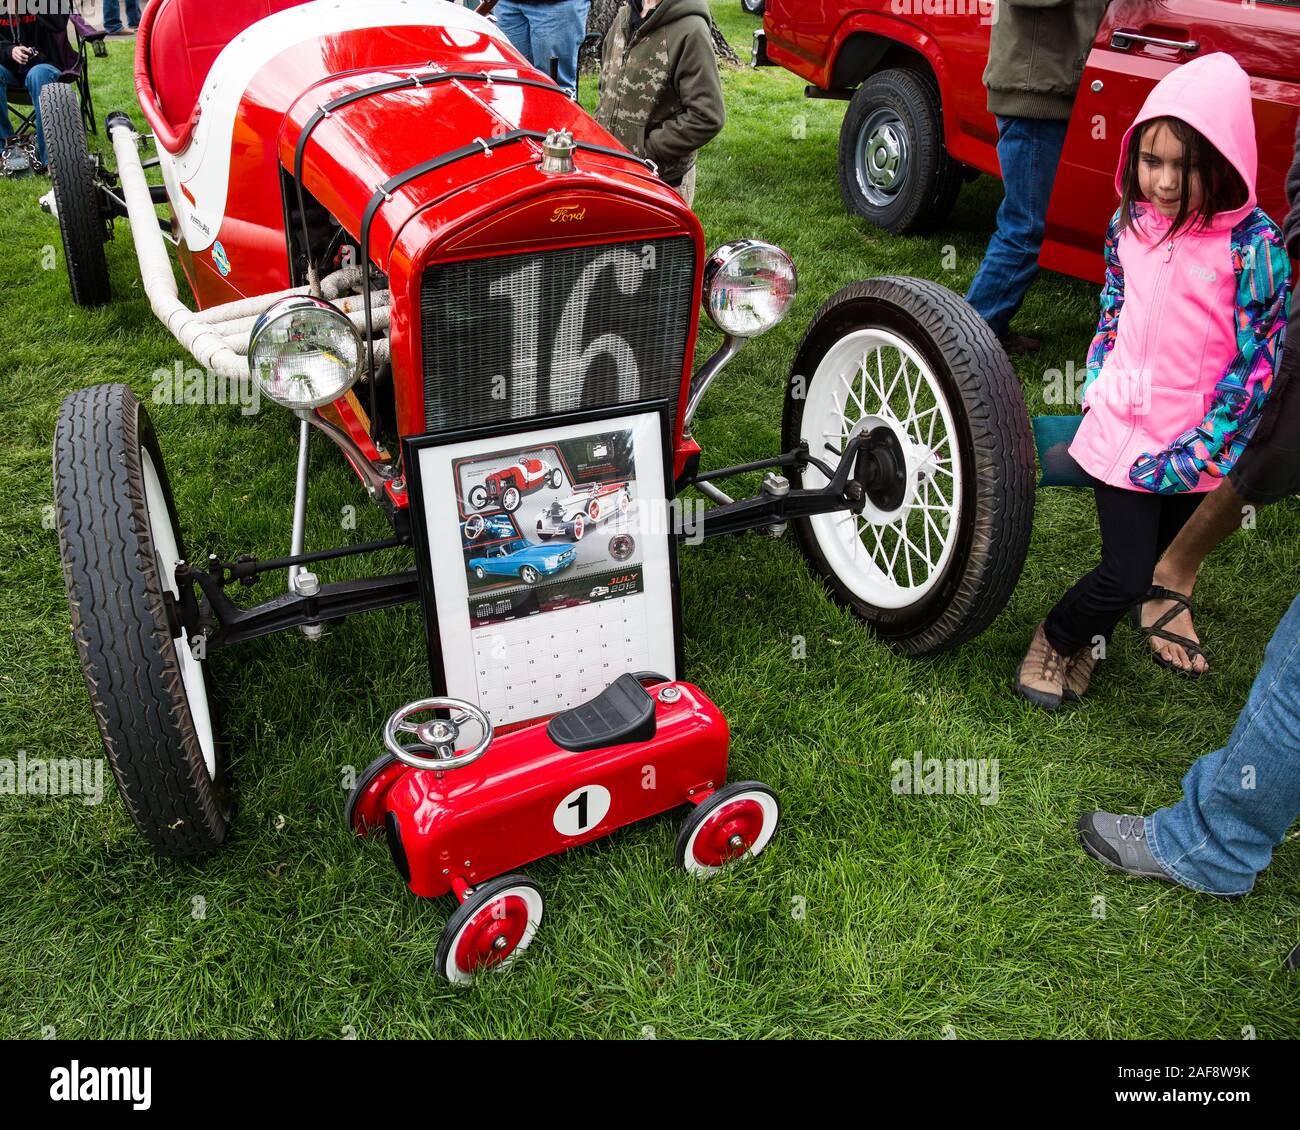 A restored stock Ford 1916 Model T Indianapolis 500 racer in the Moab April Action Car Show in Moab, Utah.  A little girl looks at the vintage toy car Stock Photo